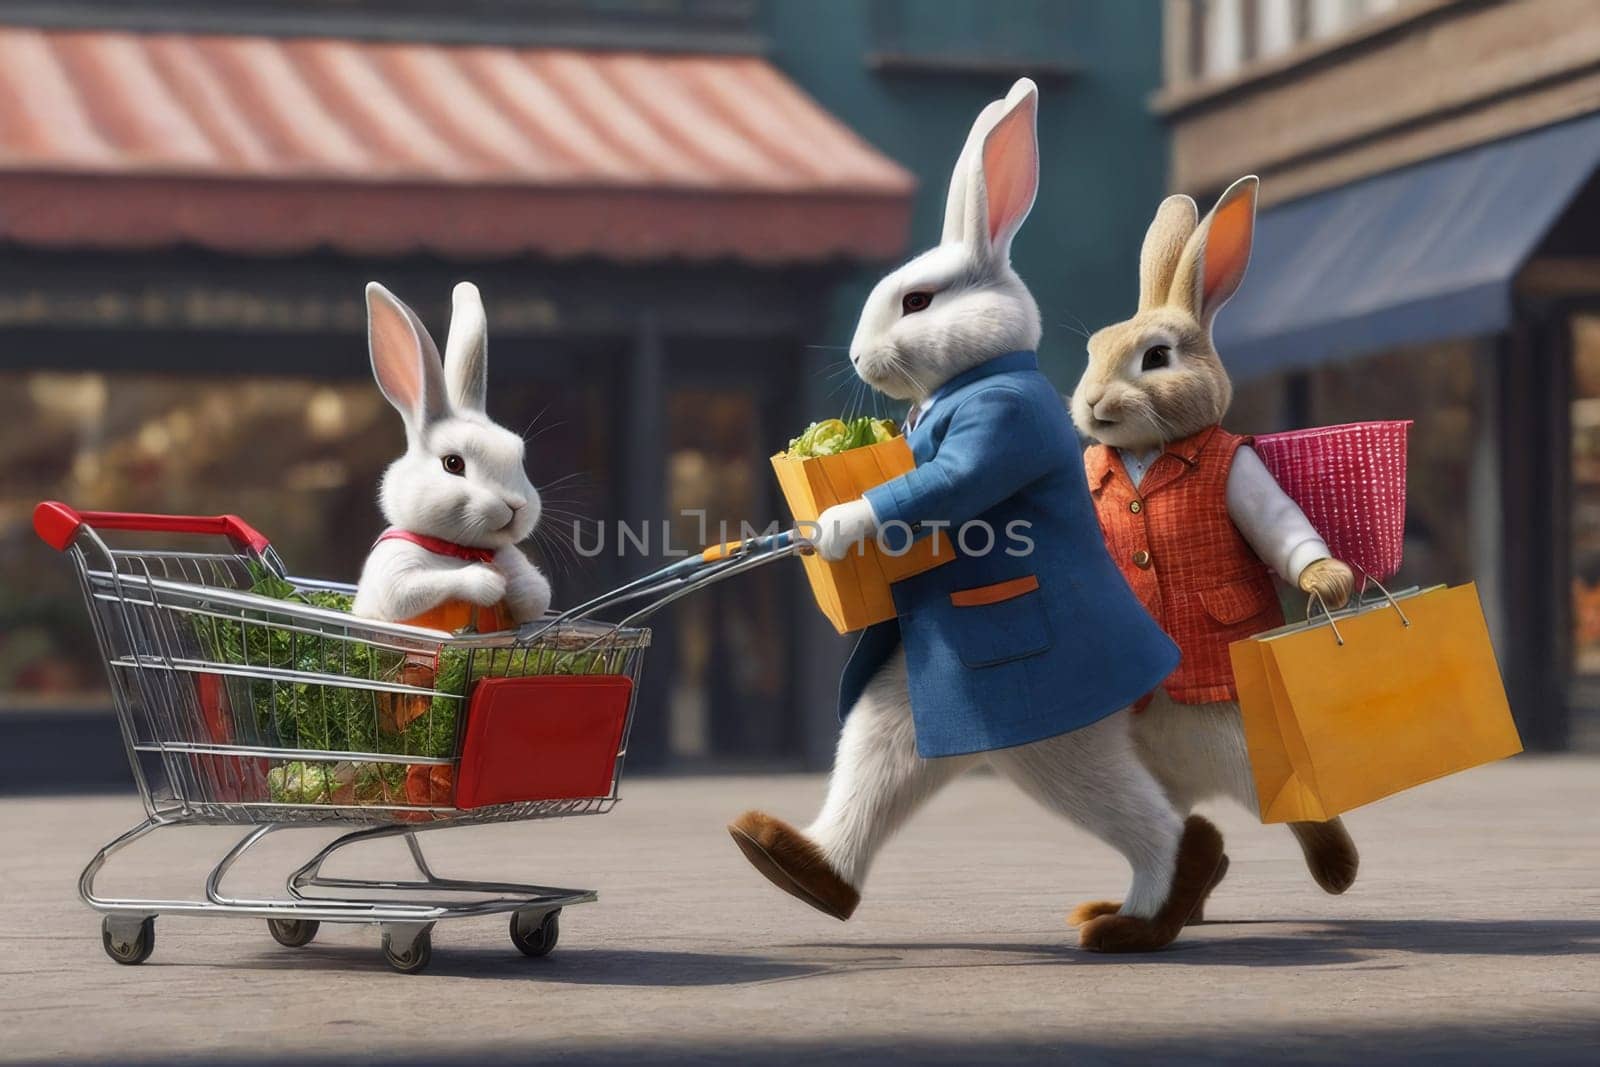 A family of rabbits in a store with carts makes purchases.